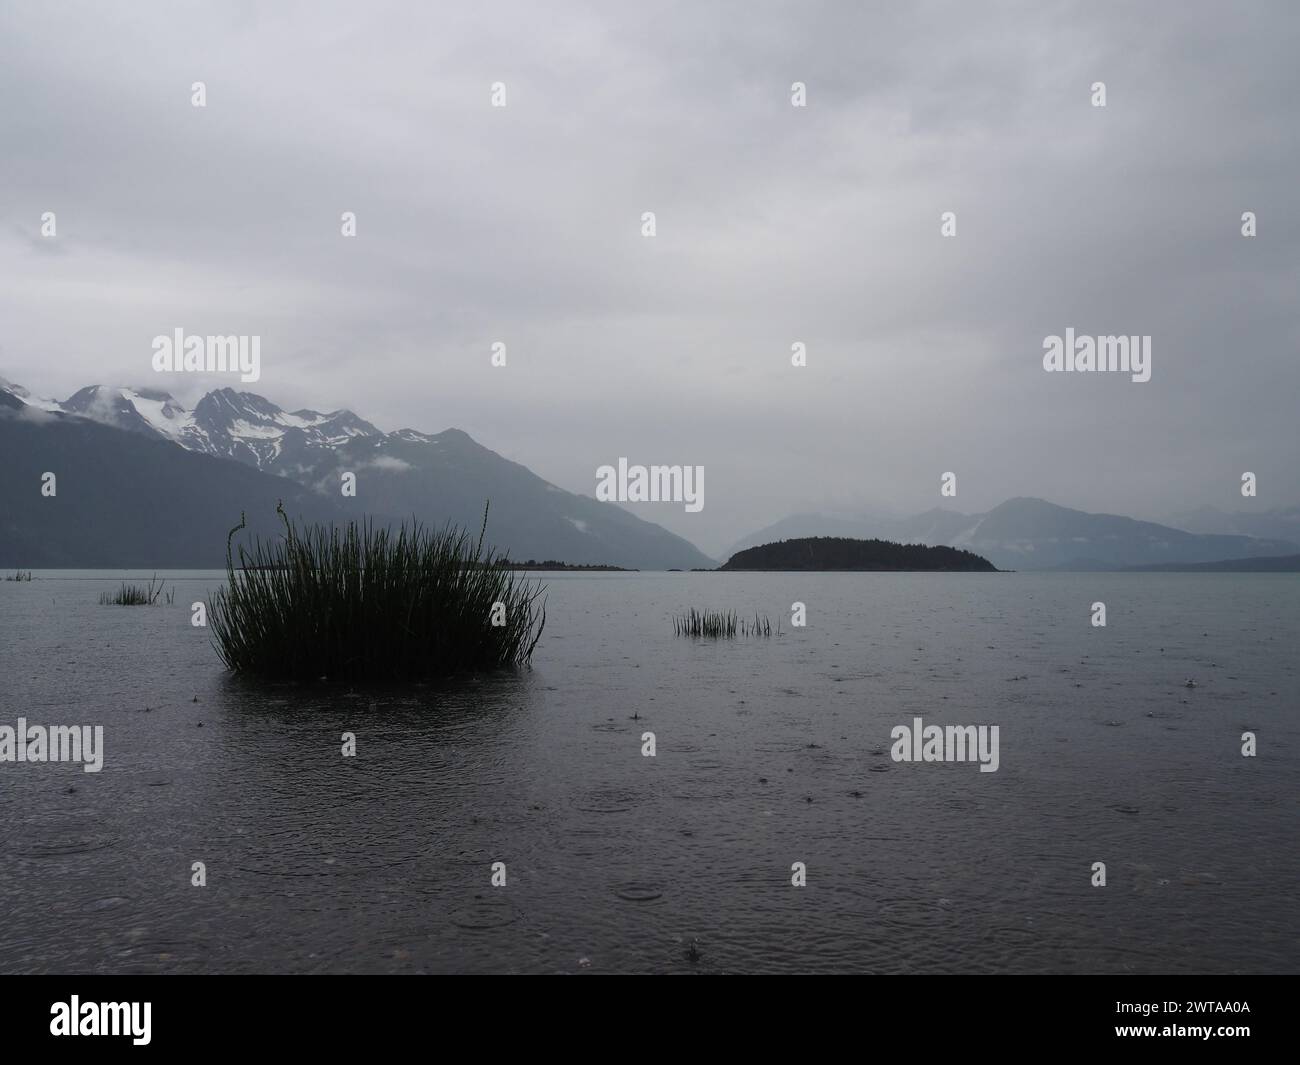 Haines, Alaska, capturing calm waters with aquatic reeds in the foreground, a distant island in the mid-ground, and fog-covered, snow-capped mountains Stock Photo